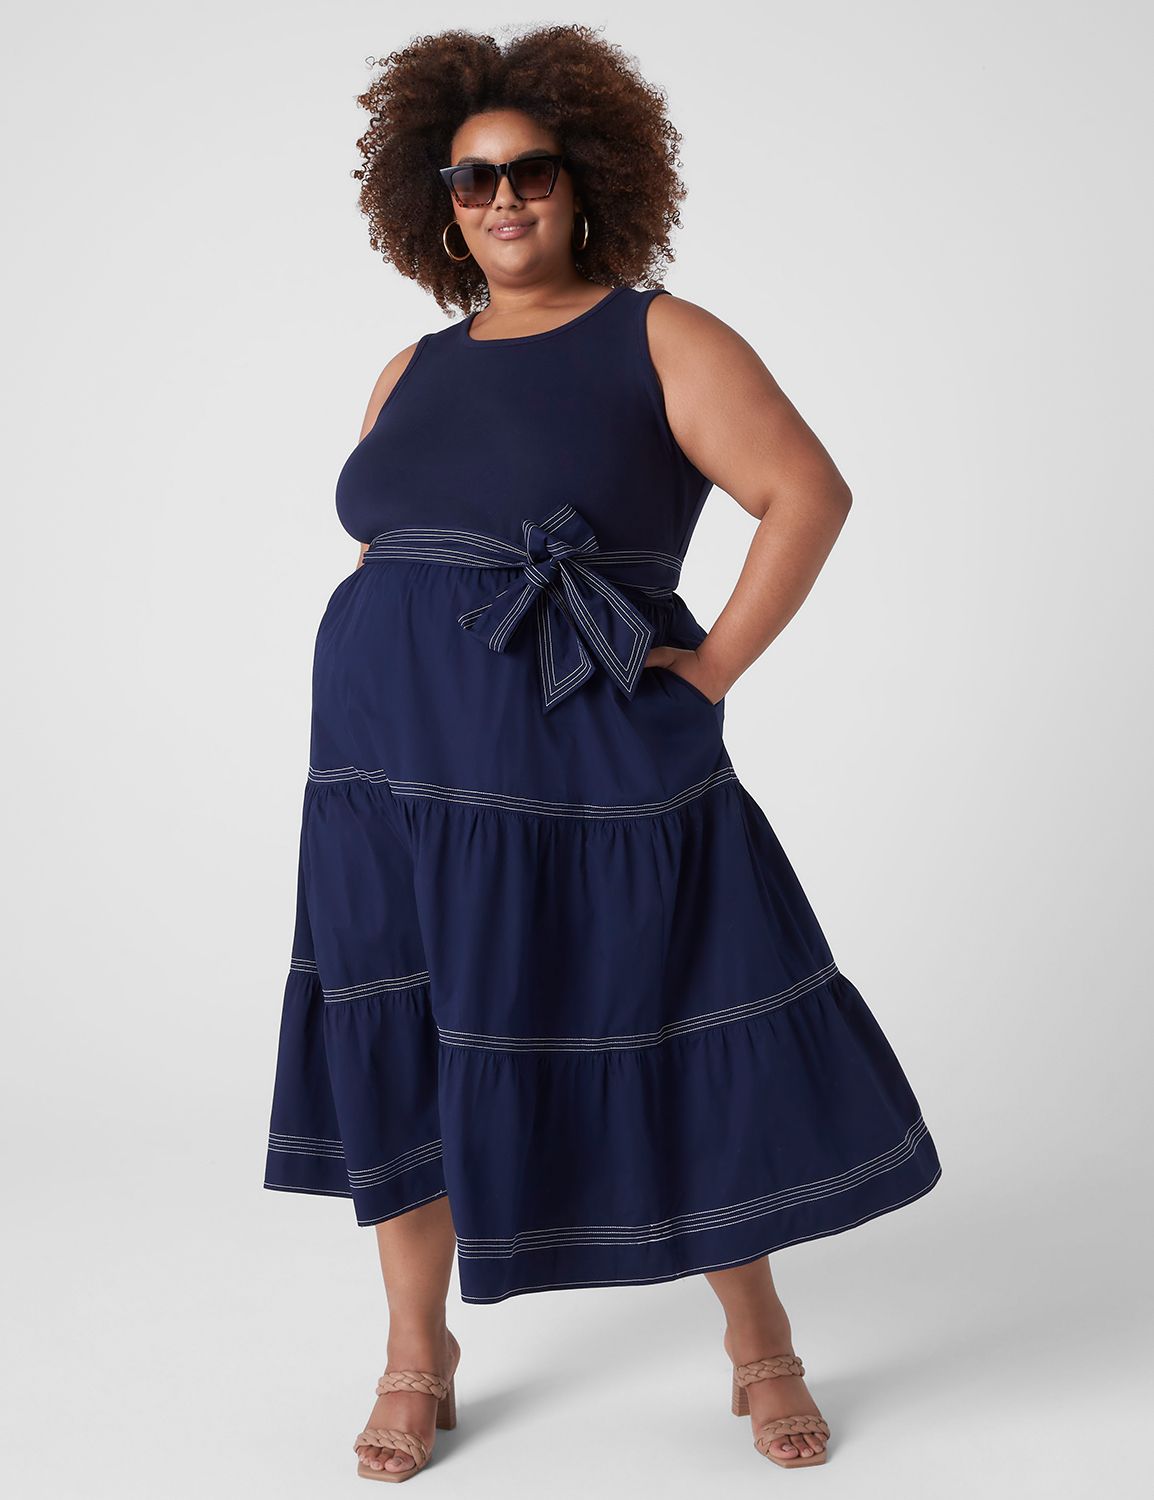 Big and Curvy runway fashions sizes 12 to 44